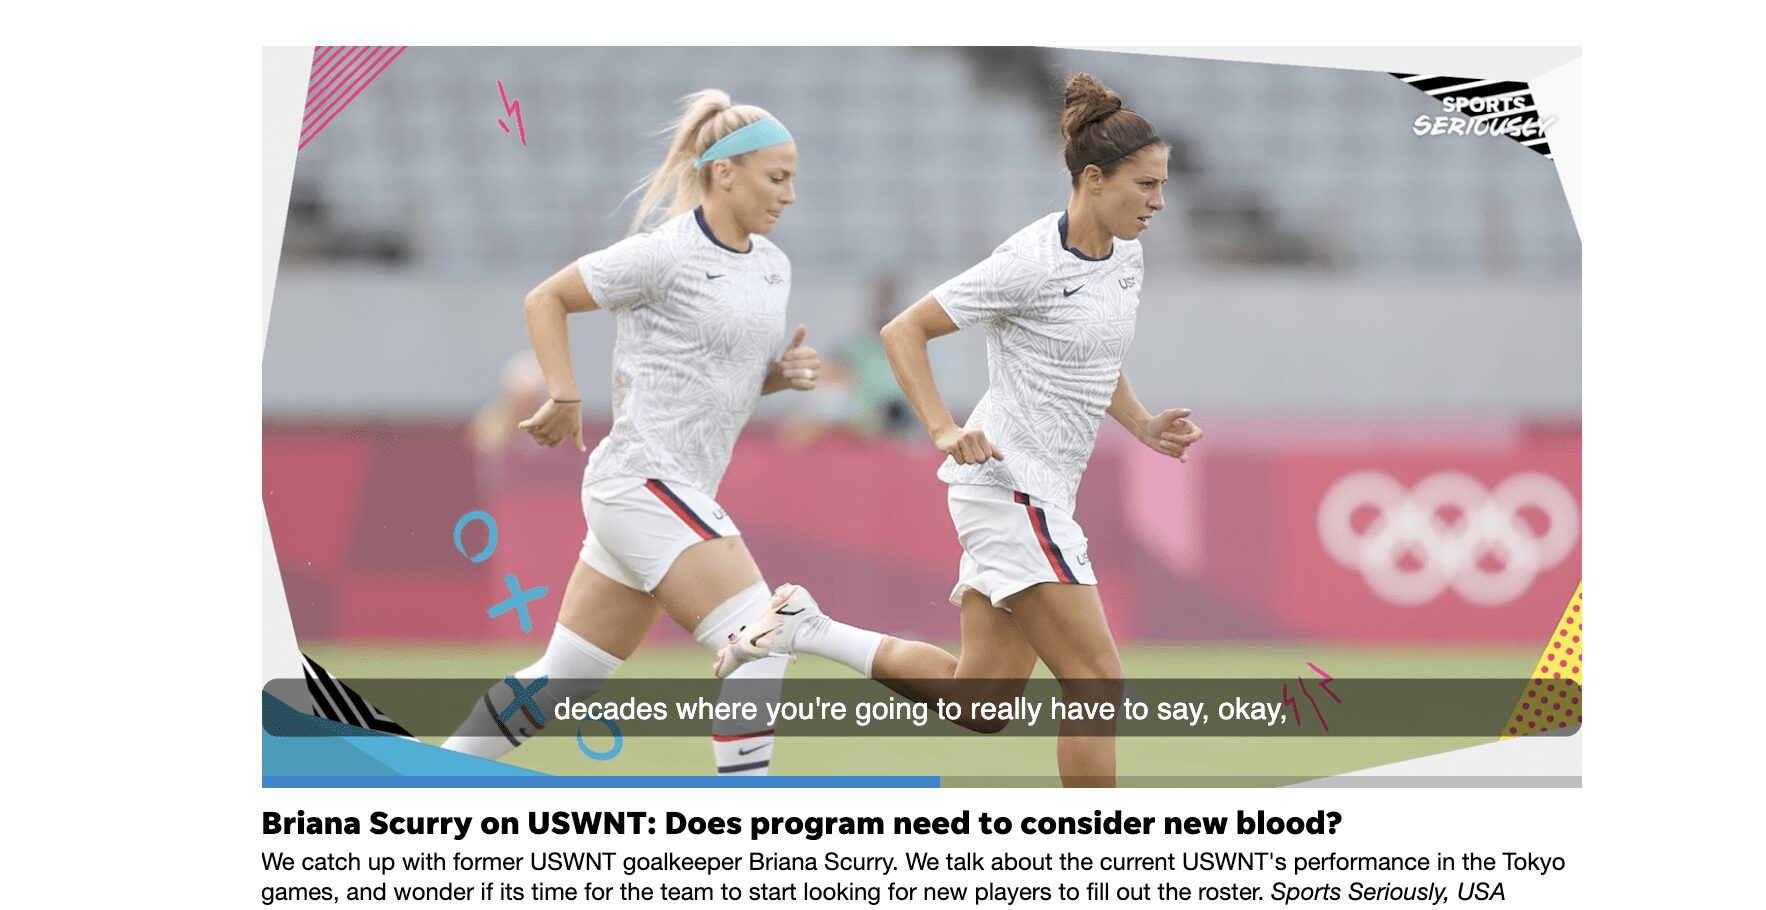 Opinion: Uswnt&Rsquo;S Loss Likely Signals An End For The Latest Golden Generation